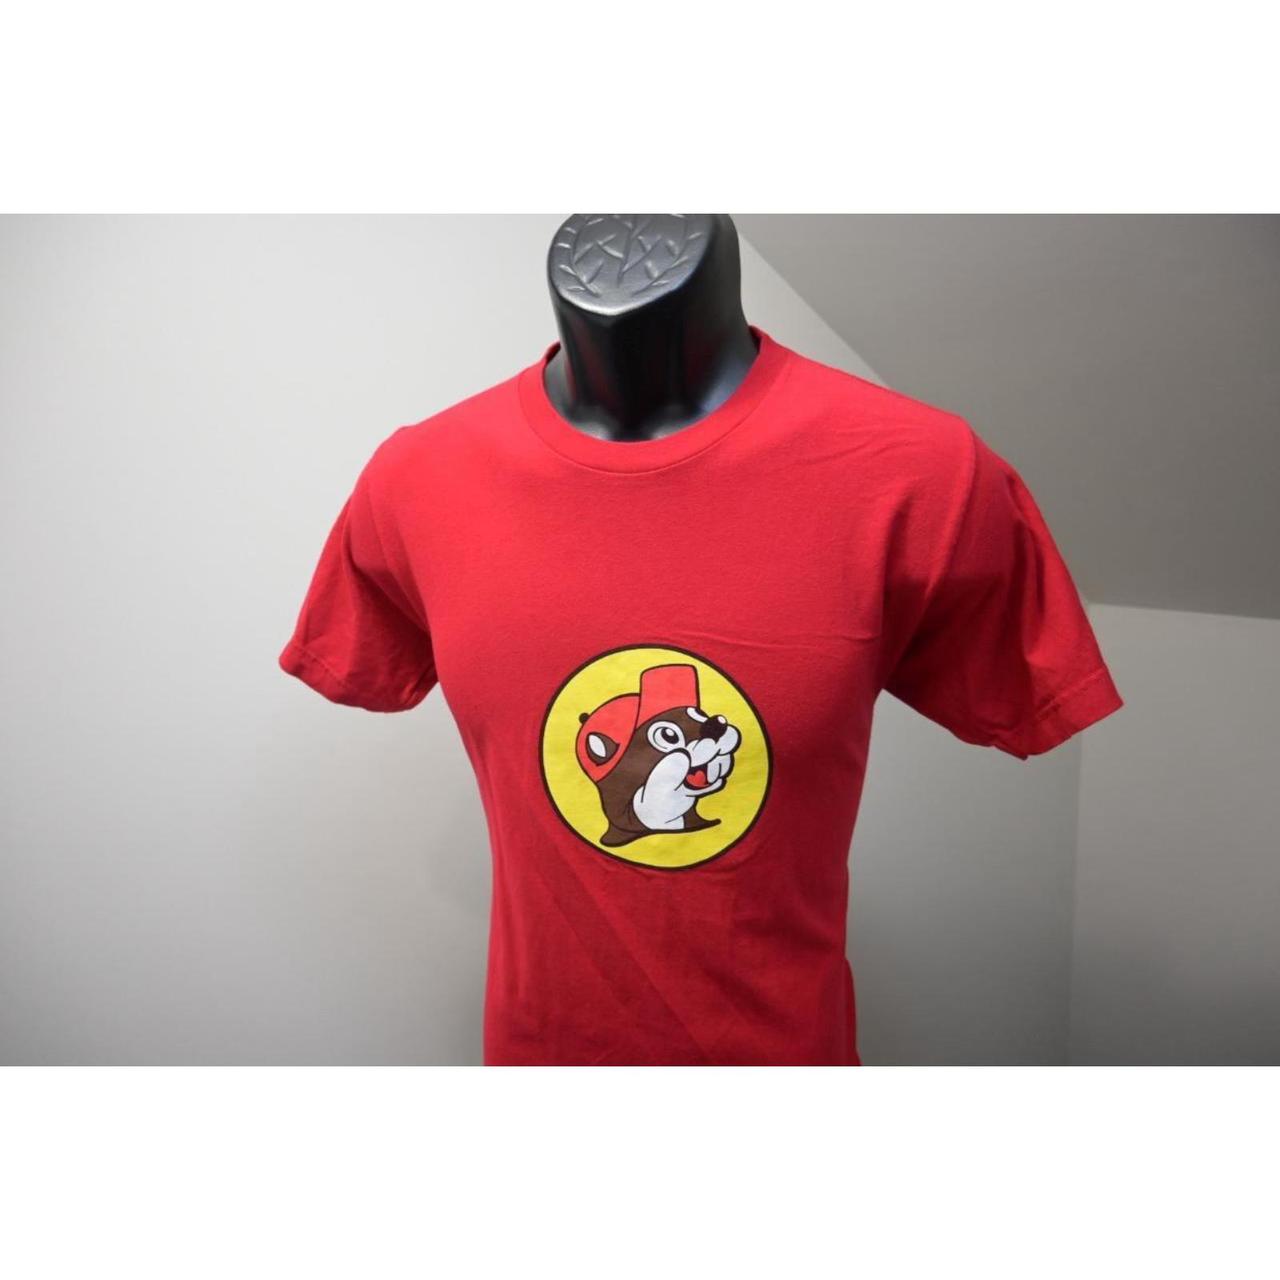 Bucee S Tee Shirt Red Short Sleeve Graphic Mens Size Depop